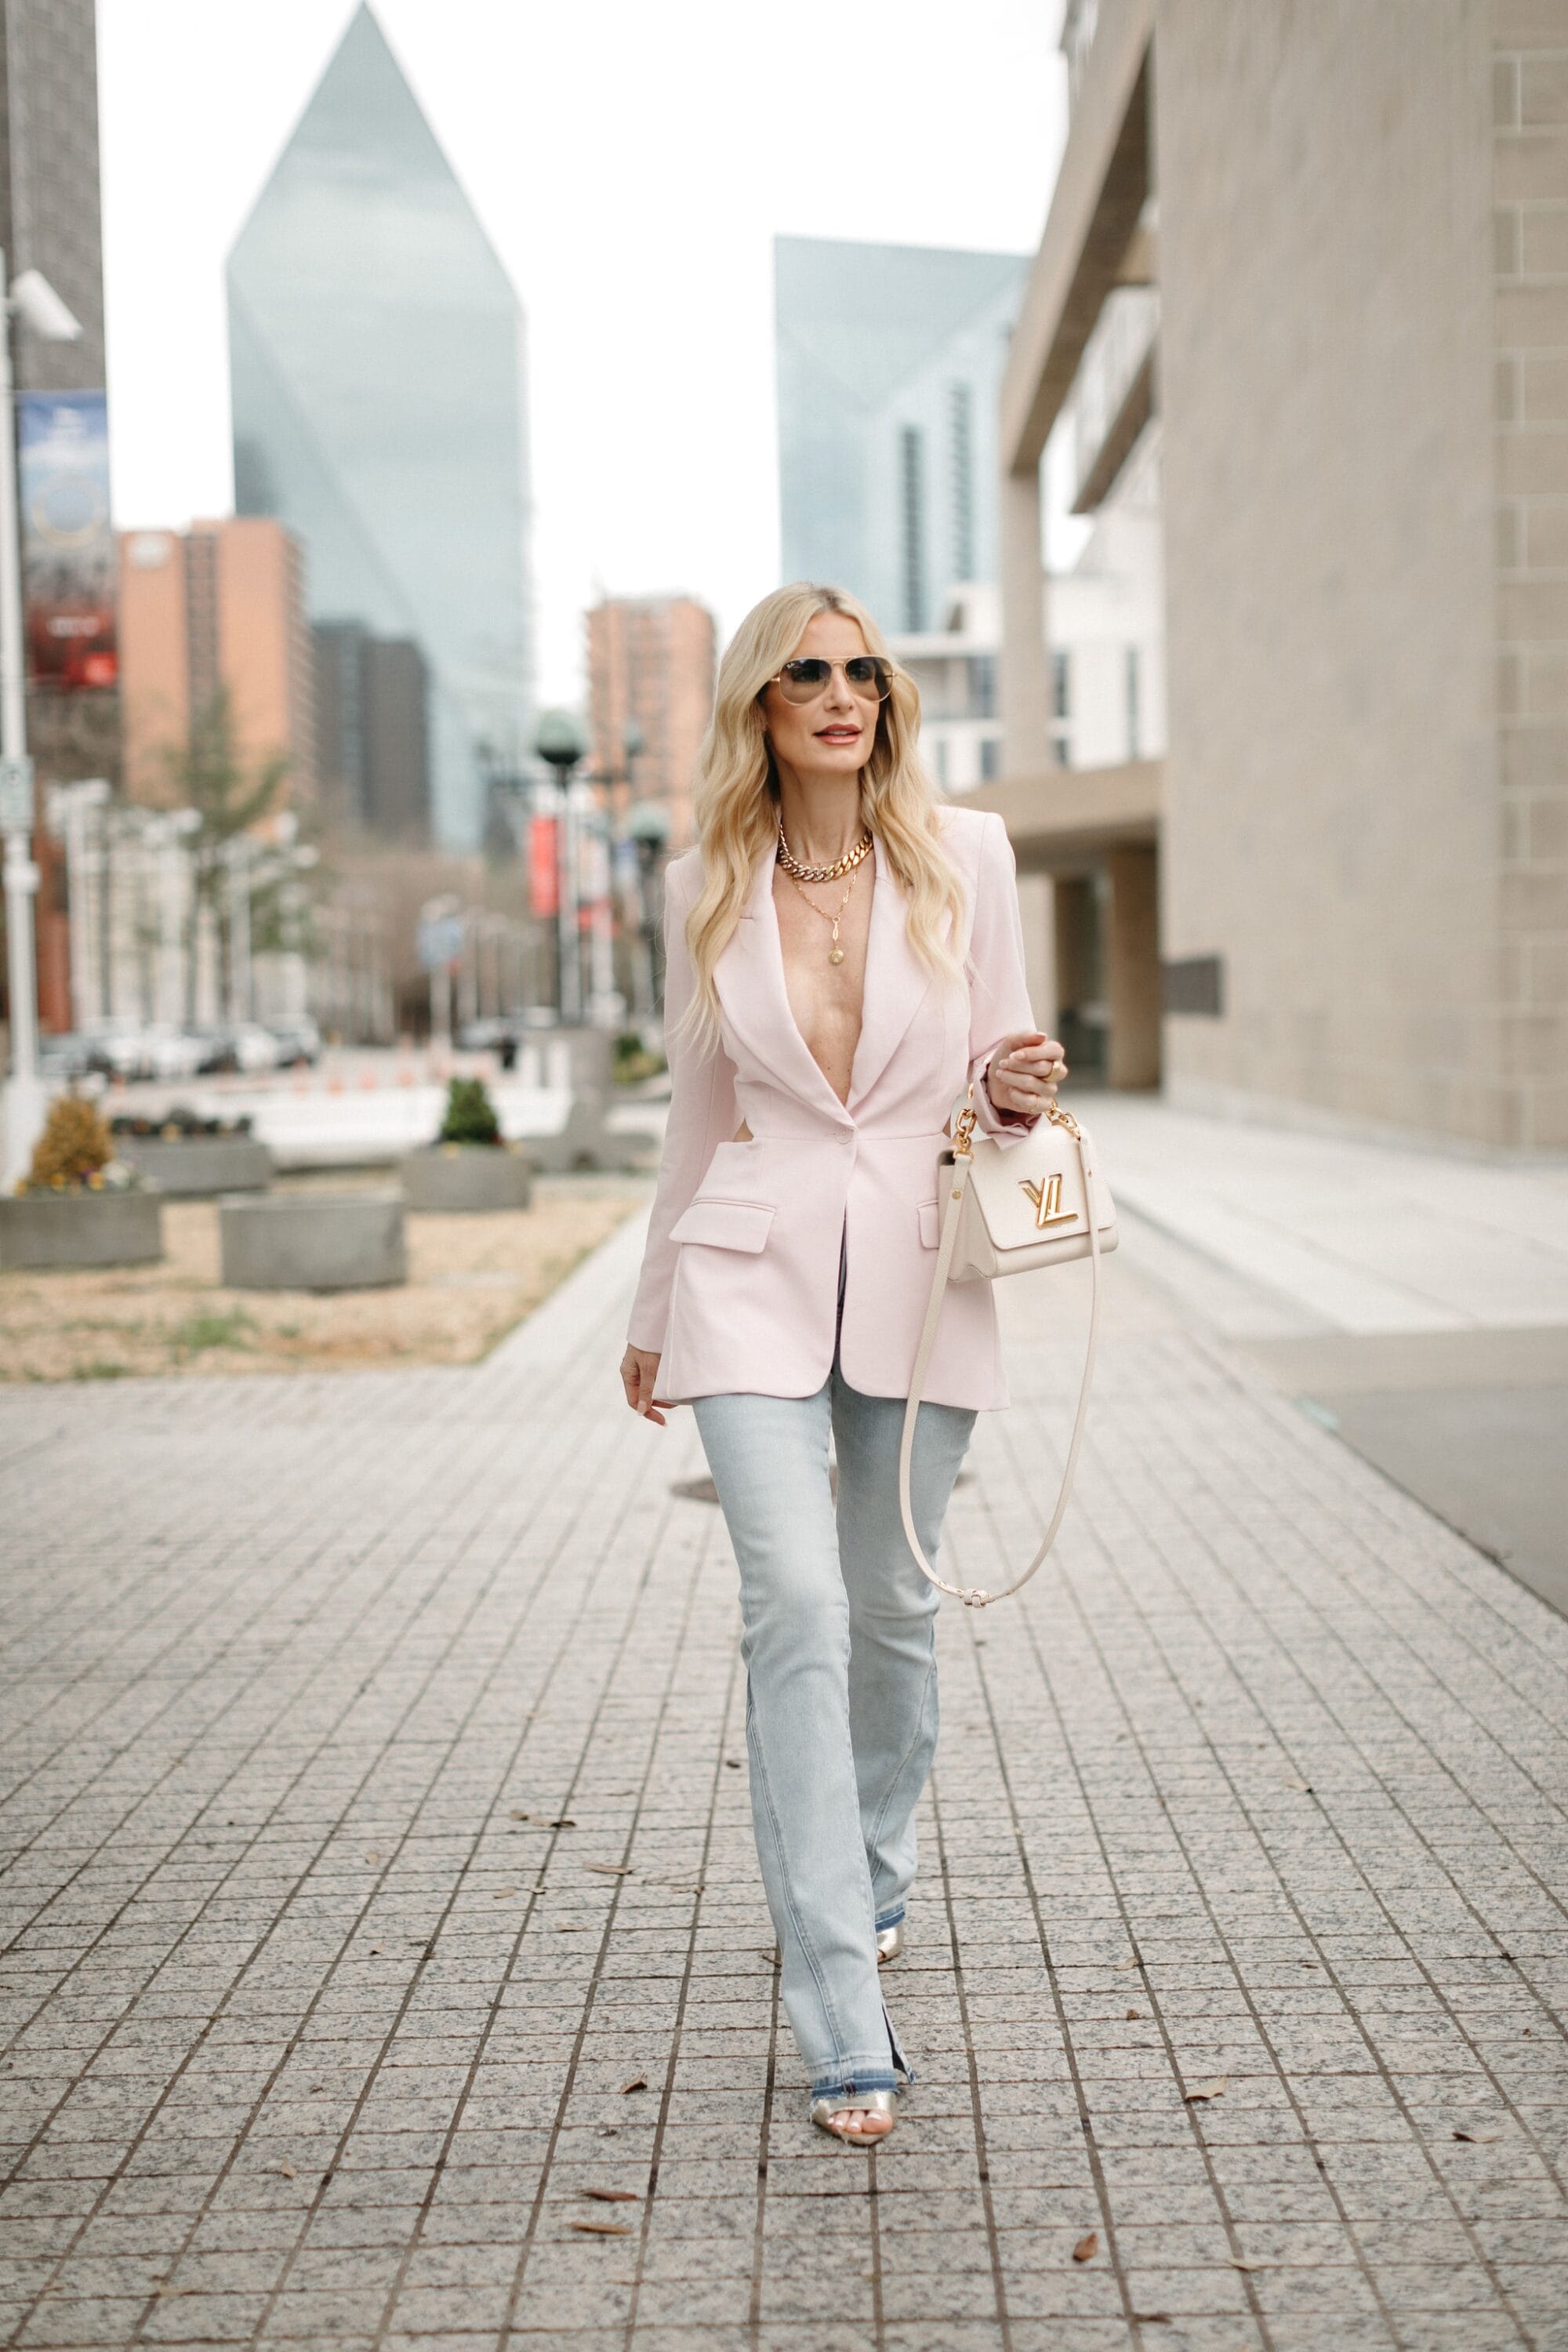 Dallas woman over 40 wearing split-hem light wash jeans fro Express with pink cut-out back blazer.